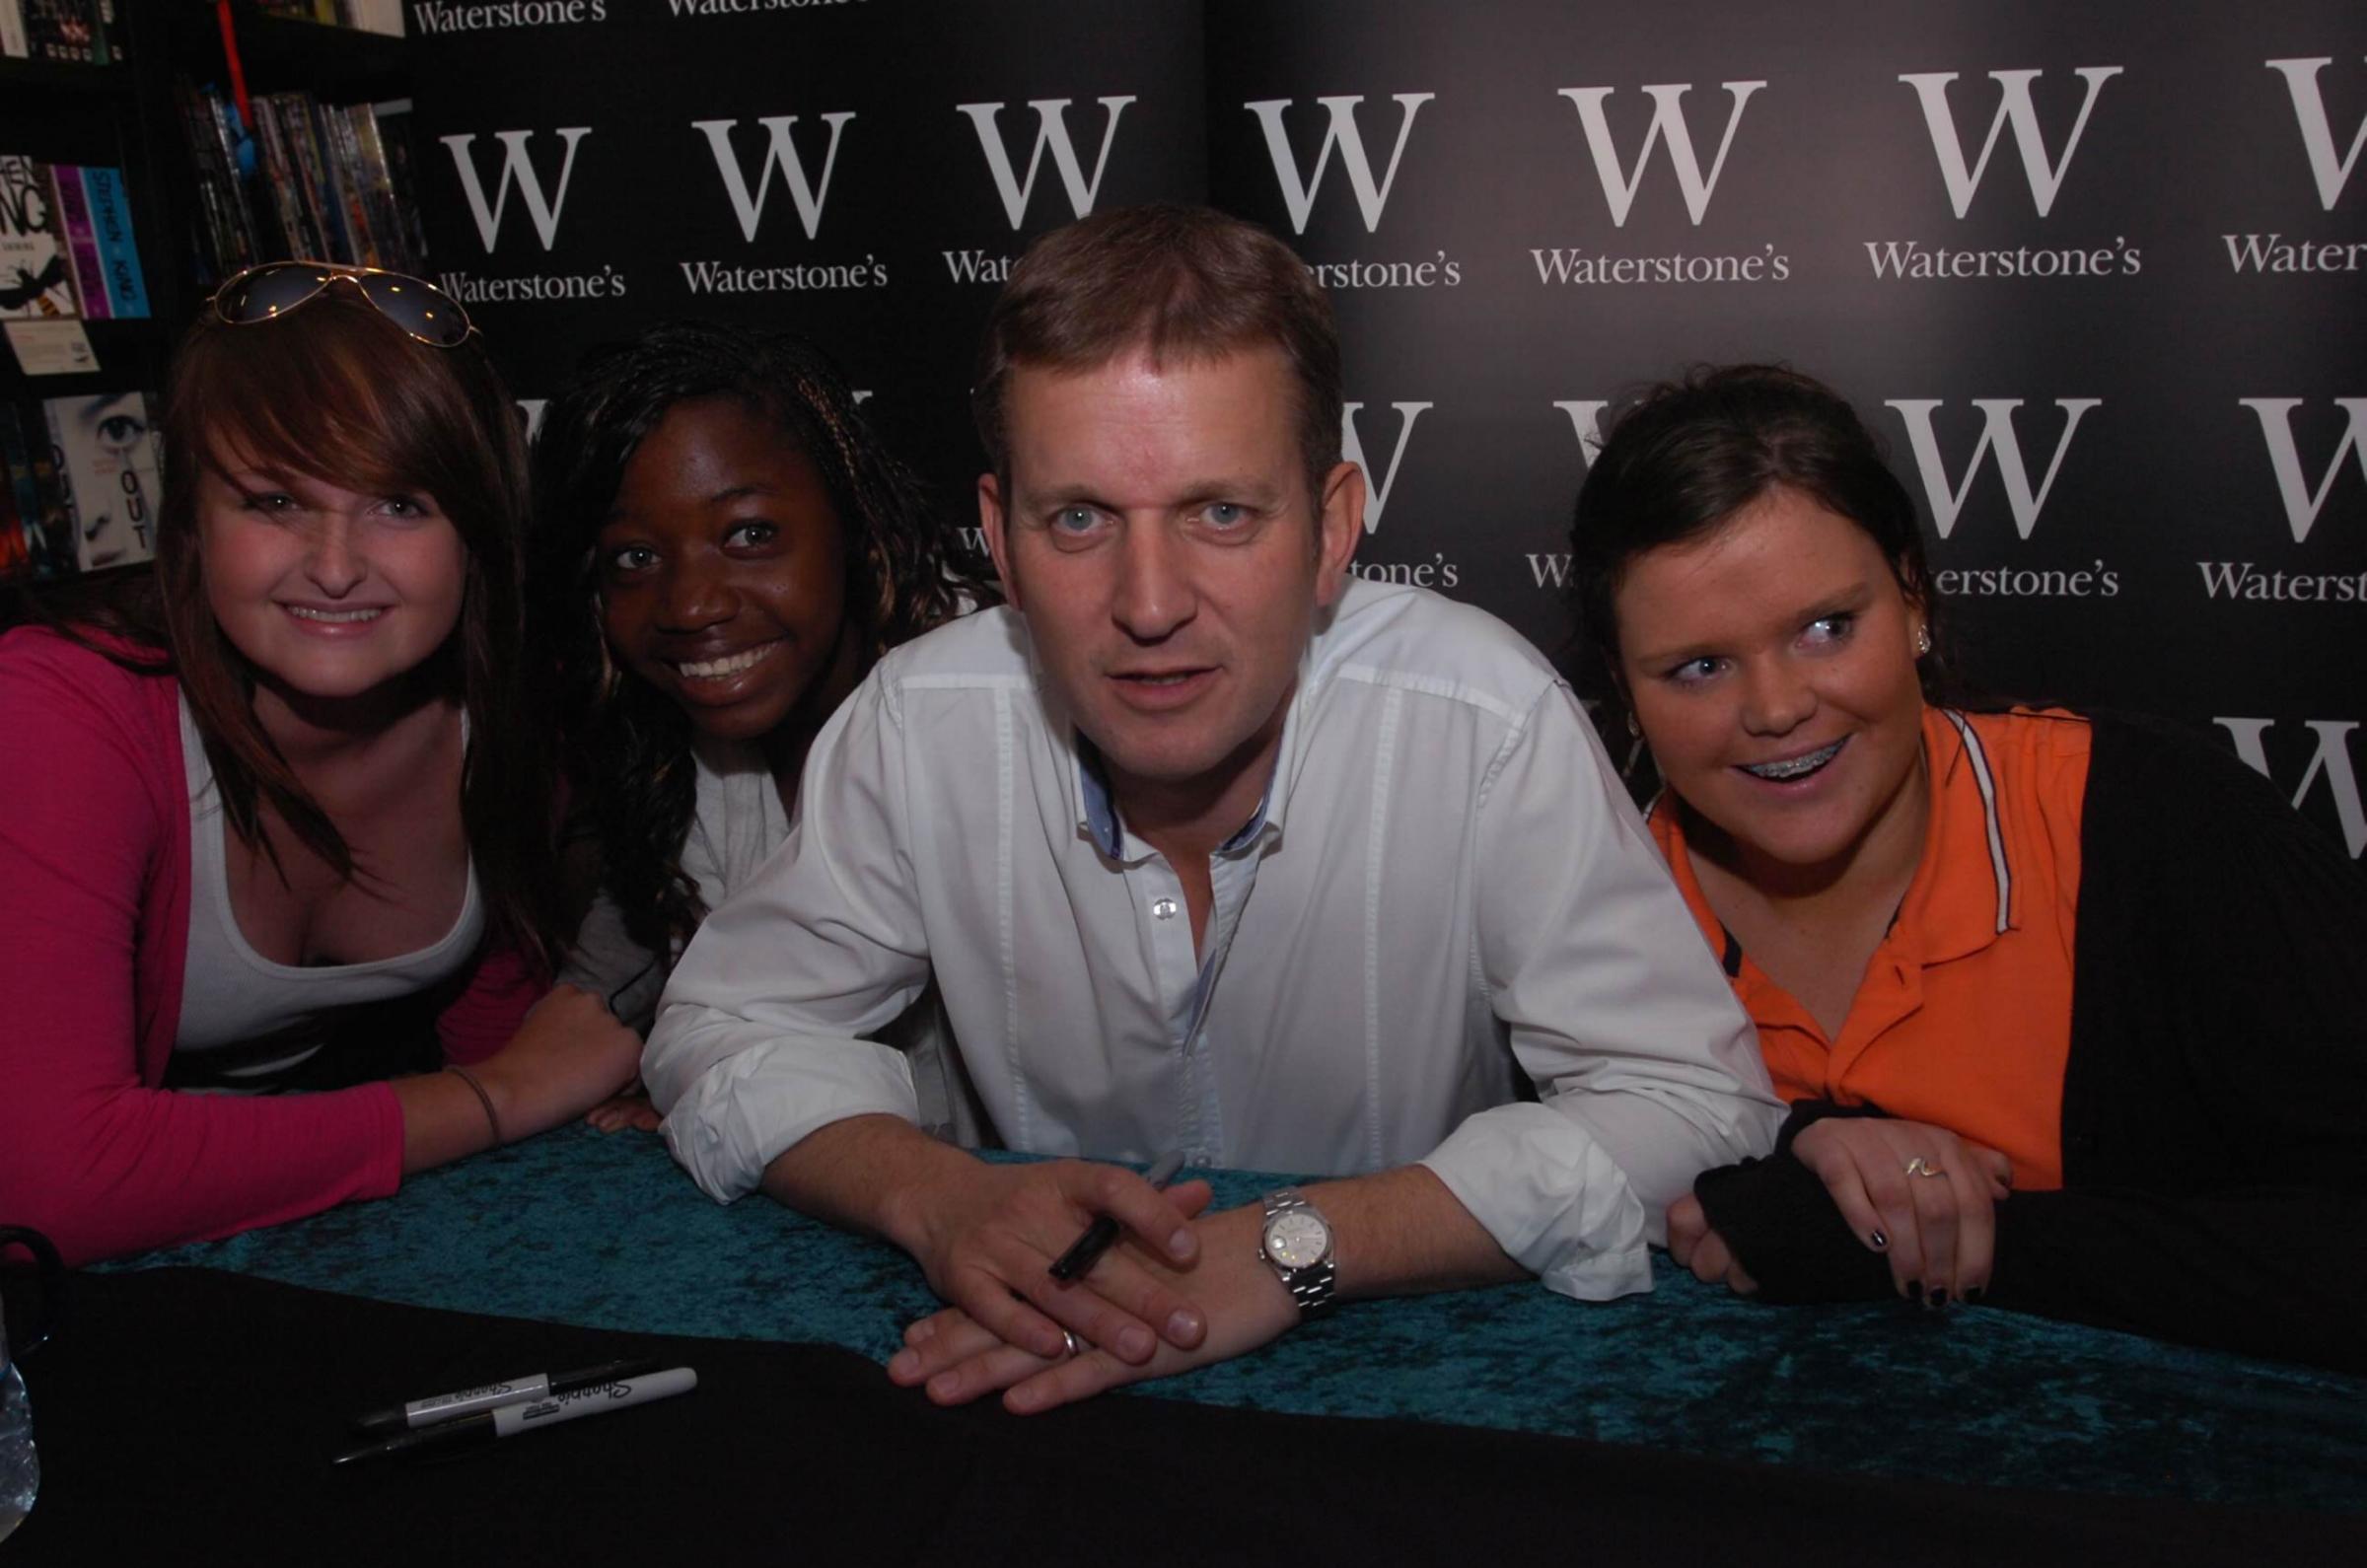 Photograph with a celebrity - Ellie Kent (far left), Hilary Robbin-Carter (second from left) and Lou Ray (far right) meet television presenter Jeremy Kyle in 2009